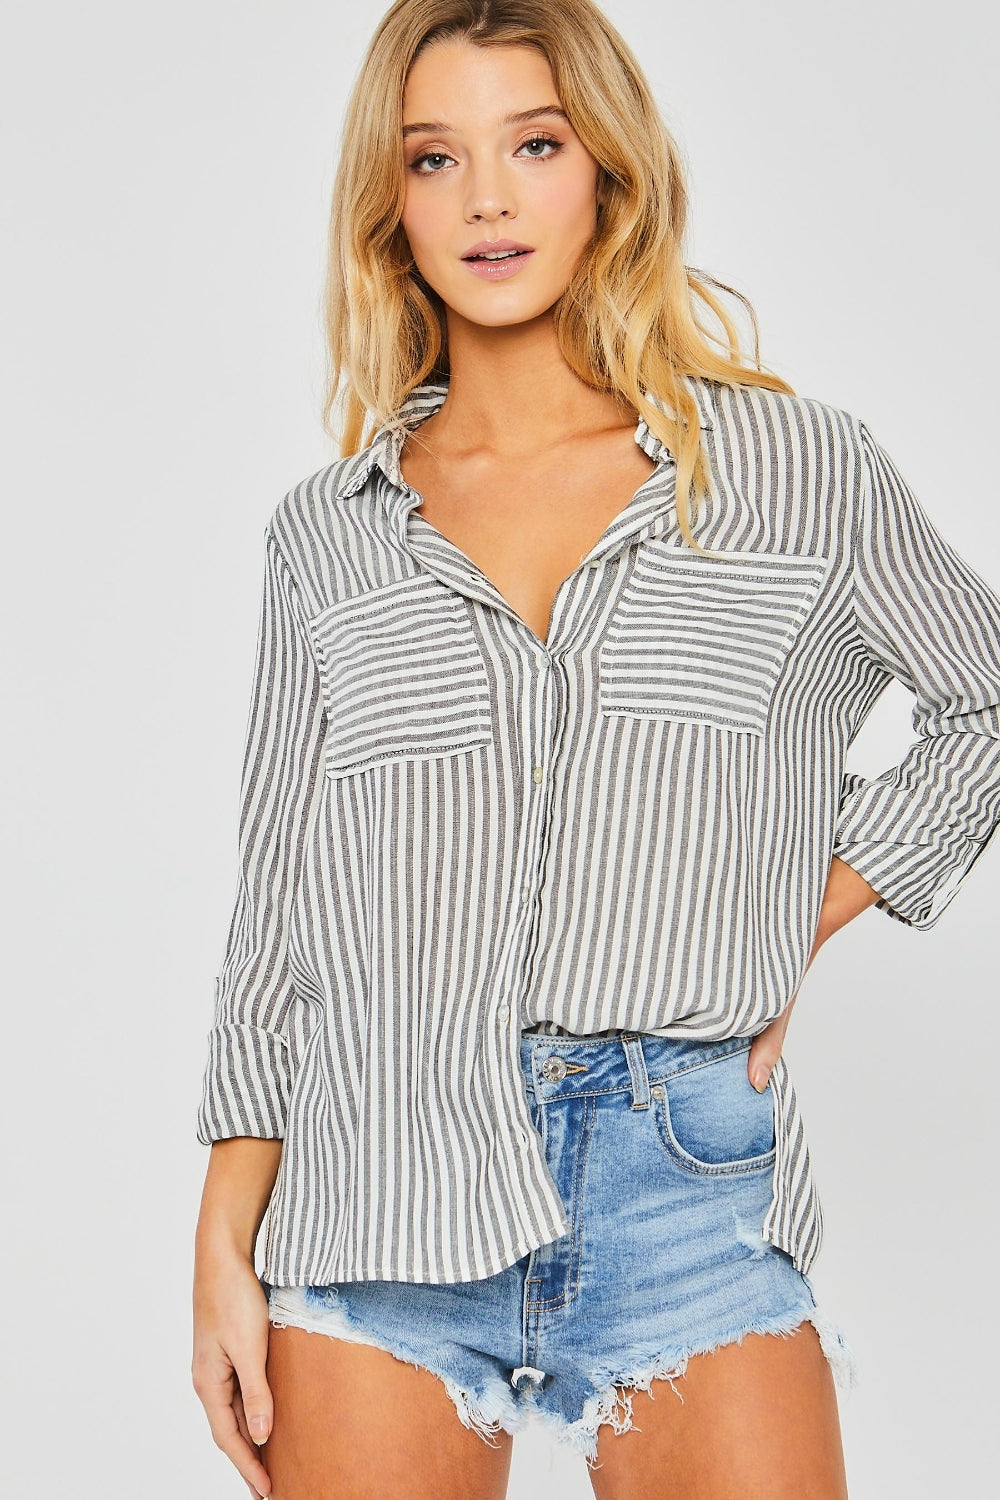 Casual & Polished Striped Shirt - Joy & Country